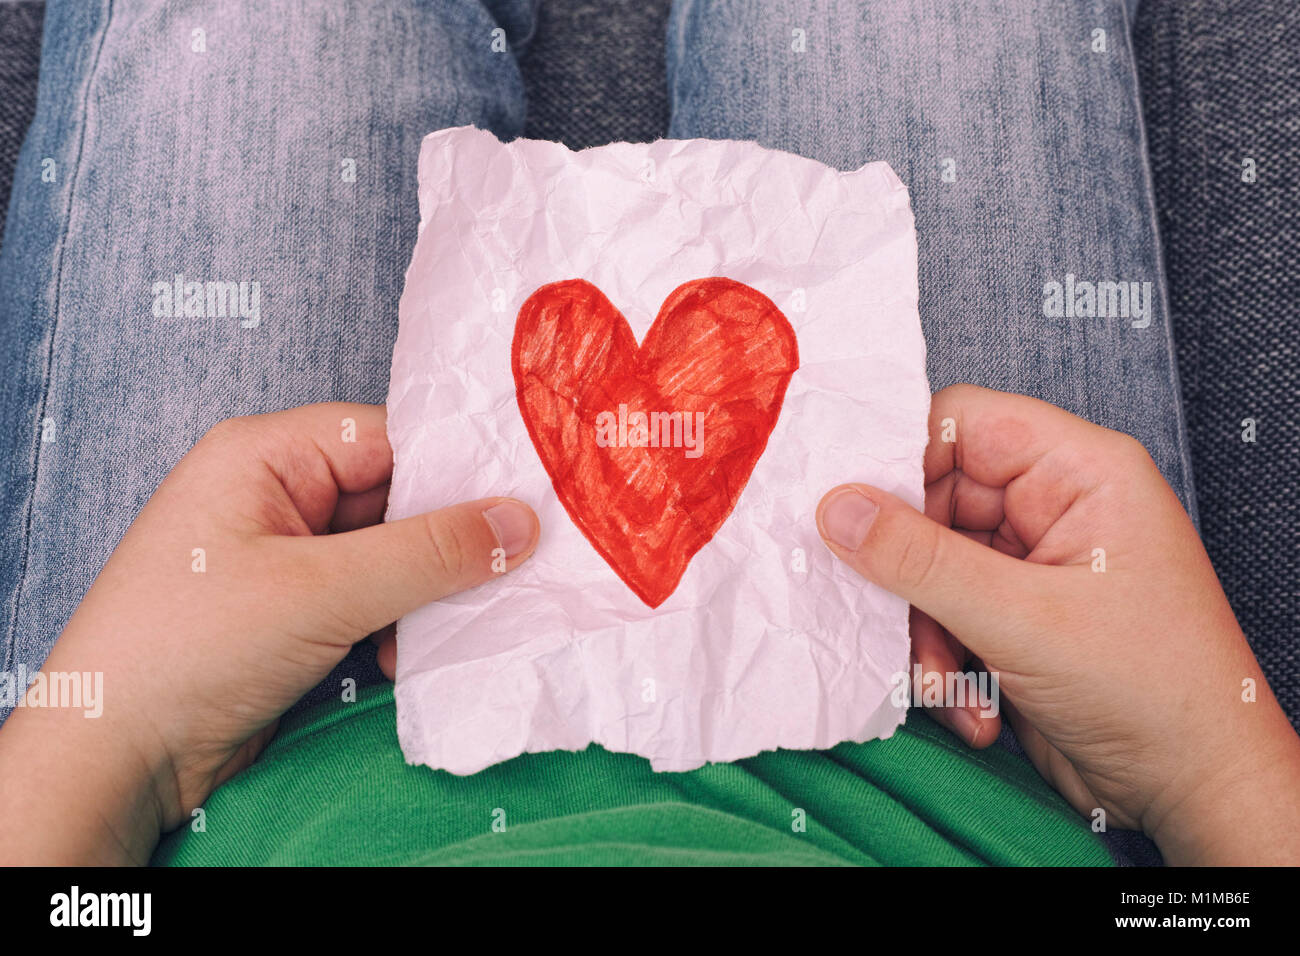 Young boy holding crumpled piece of paper with red heart shape. Close up. Stock Photo